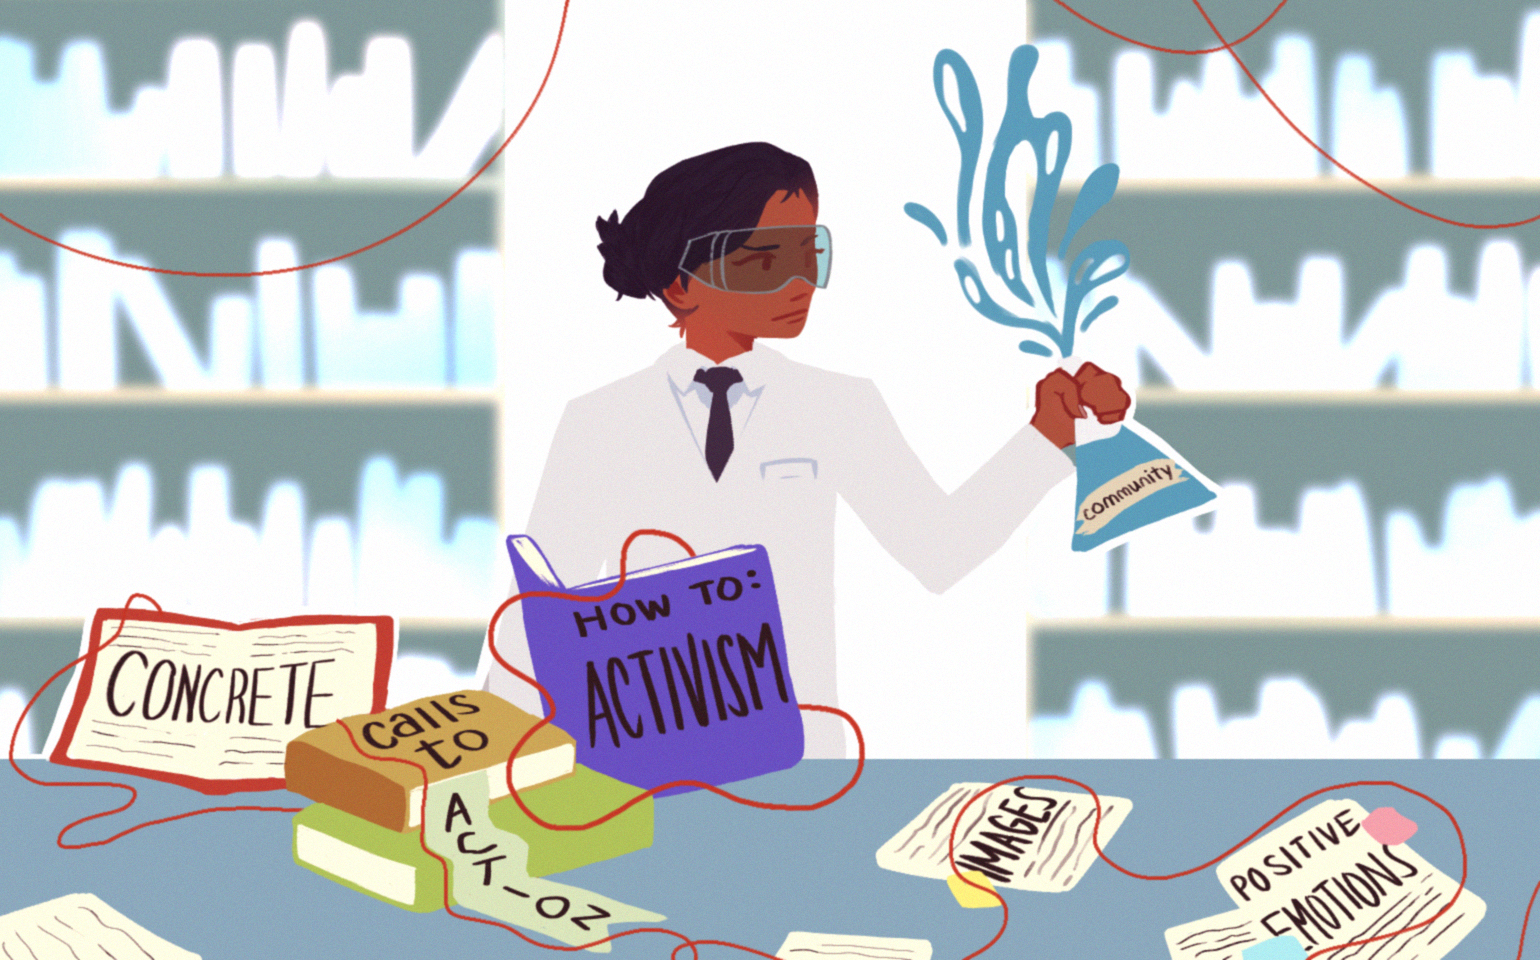 A scientist looks to formulate activism in a lab, to signify creating successful activism.